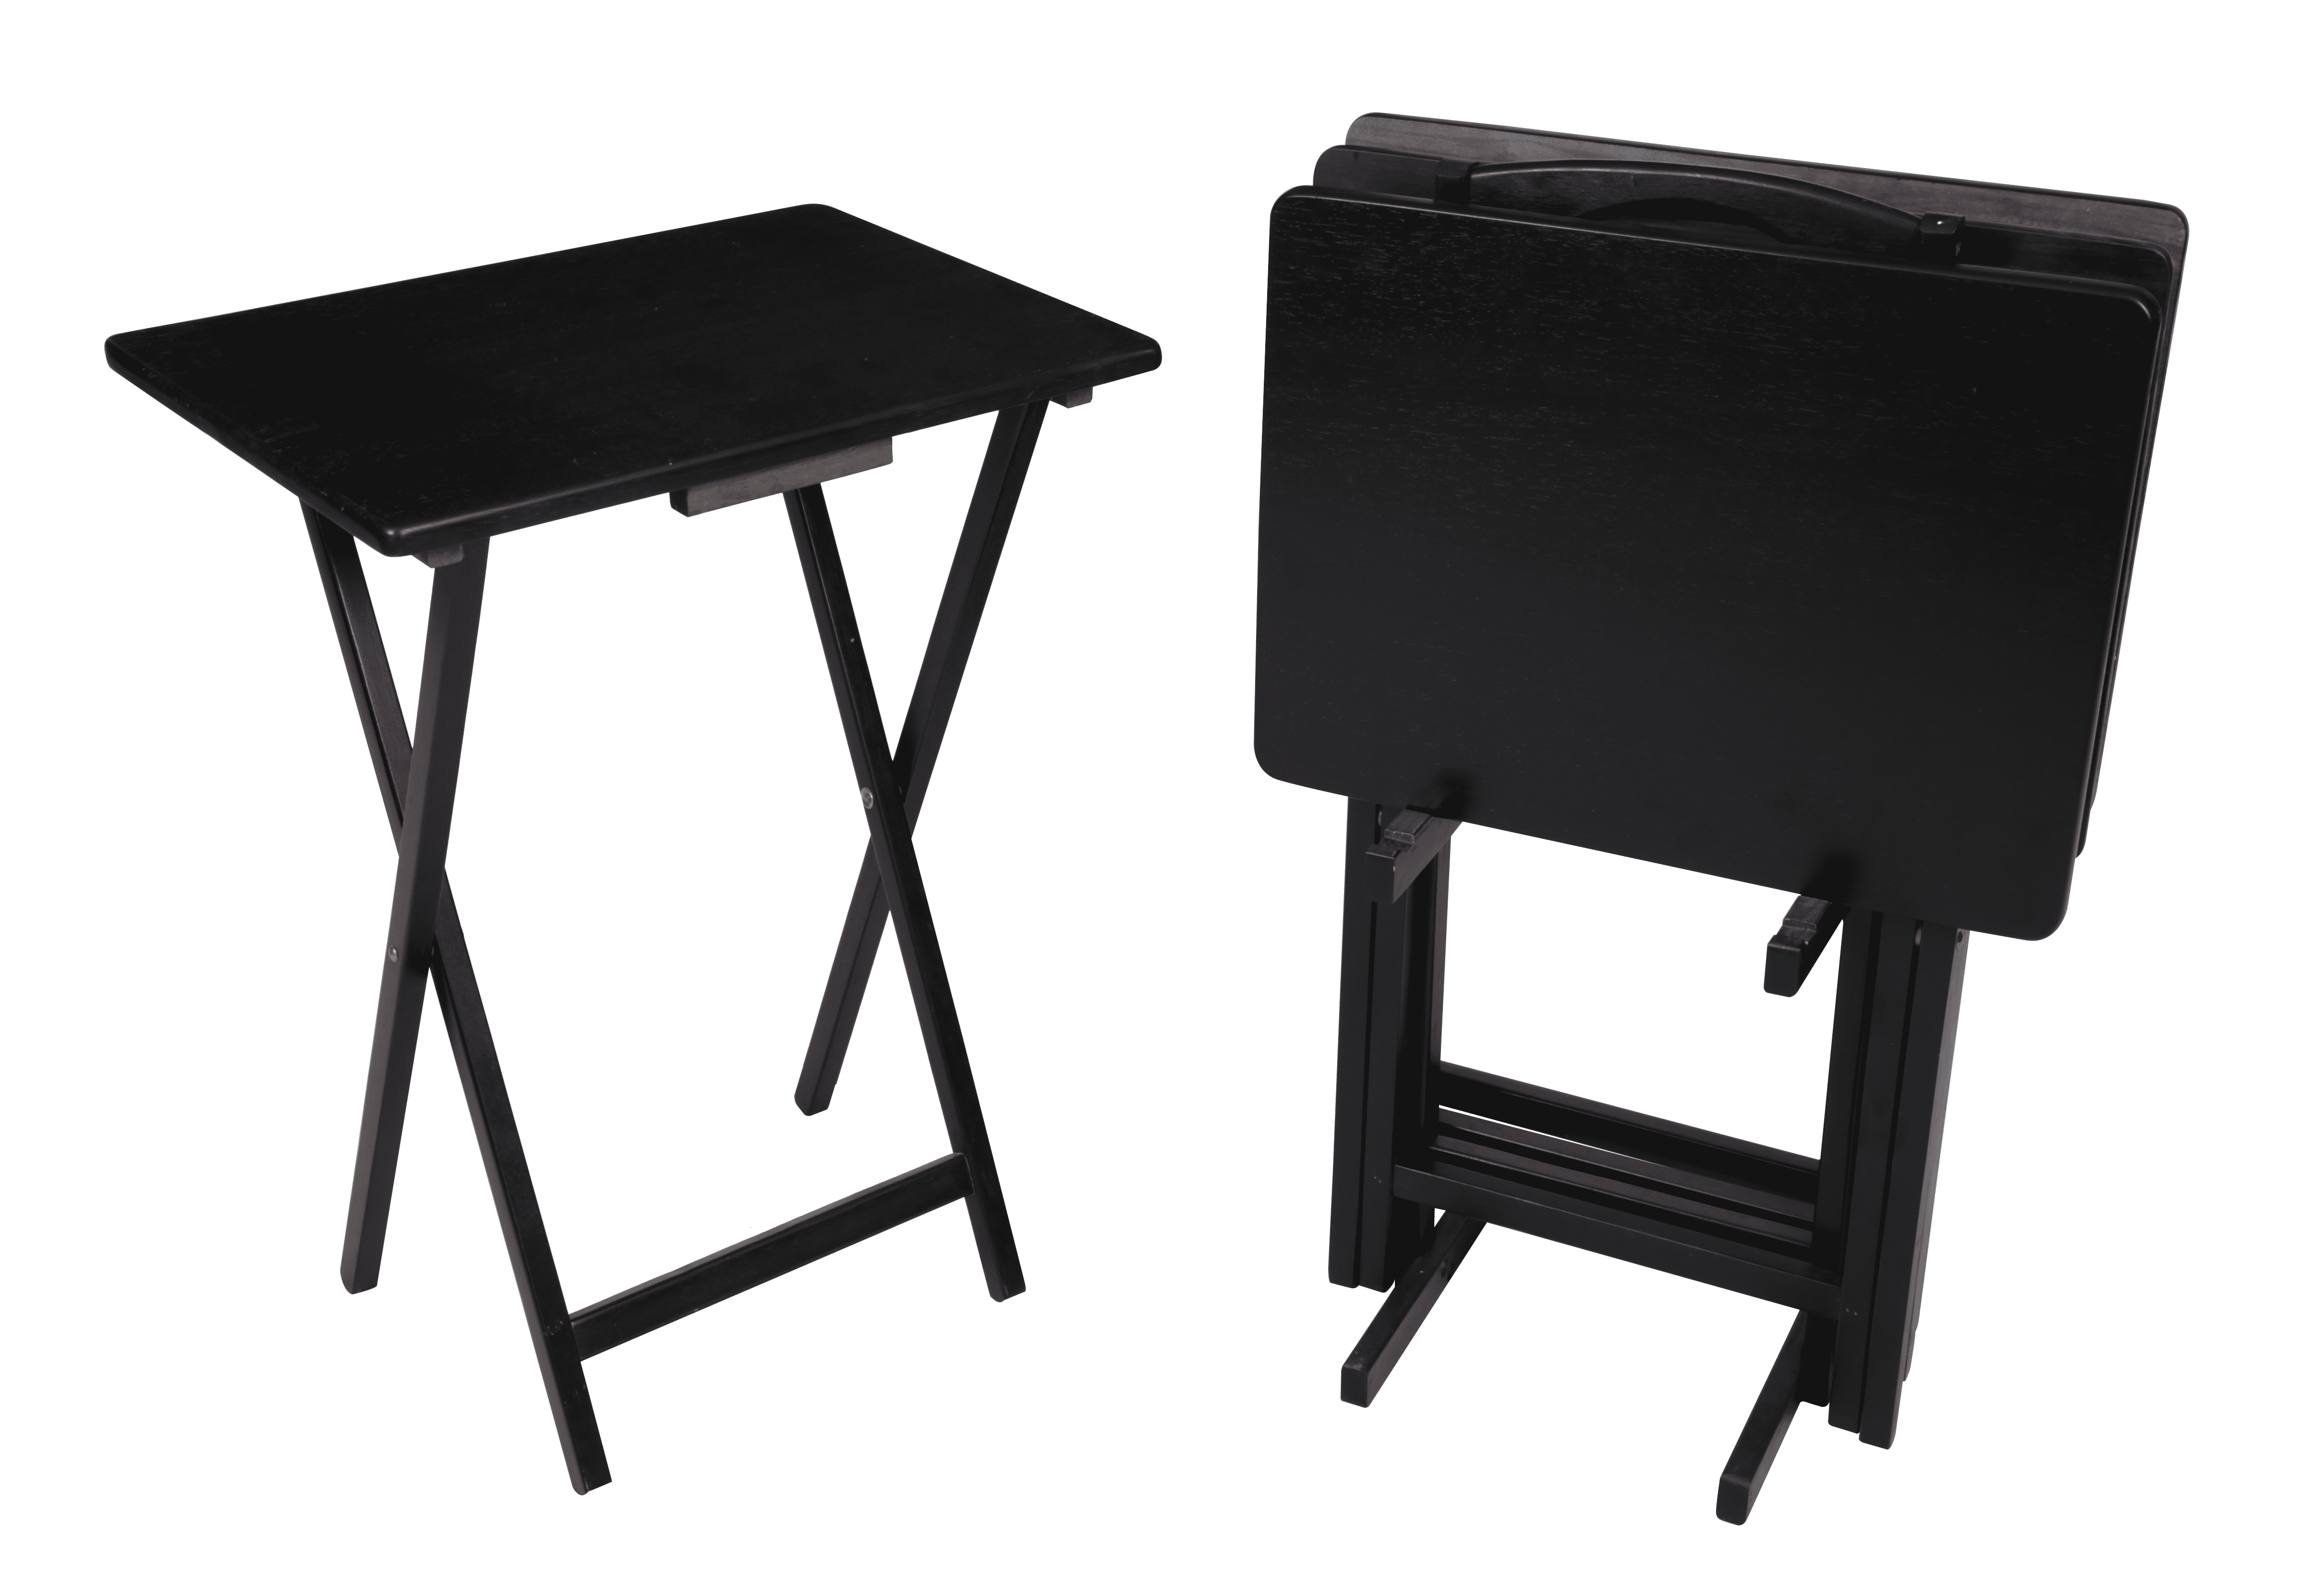 Set of 2 or 4 Made in The USA Moose and Bear Fold-able Wood TV Tray Tables